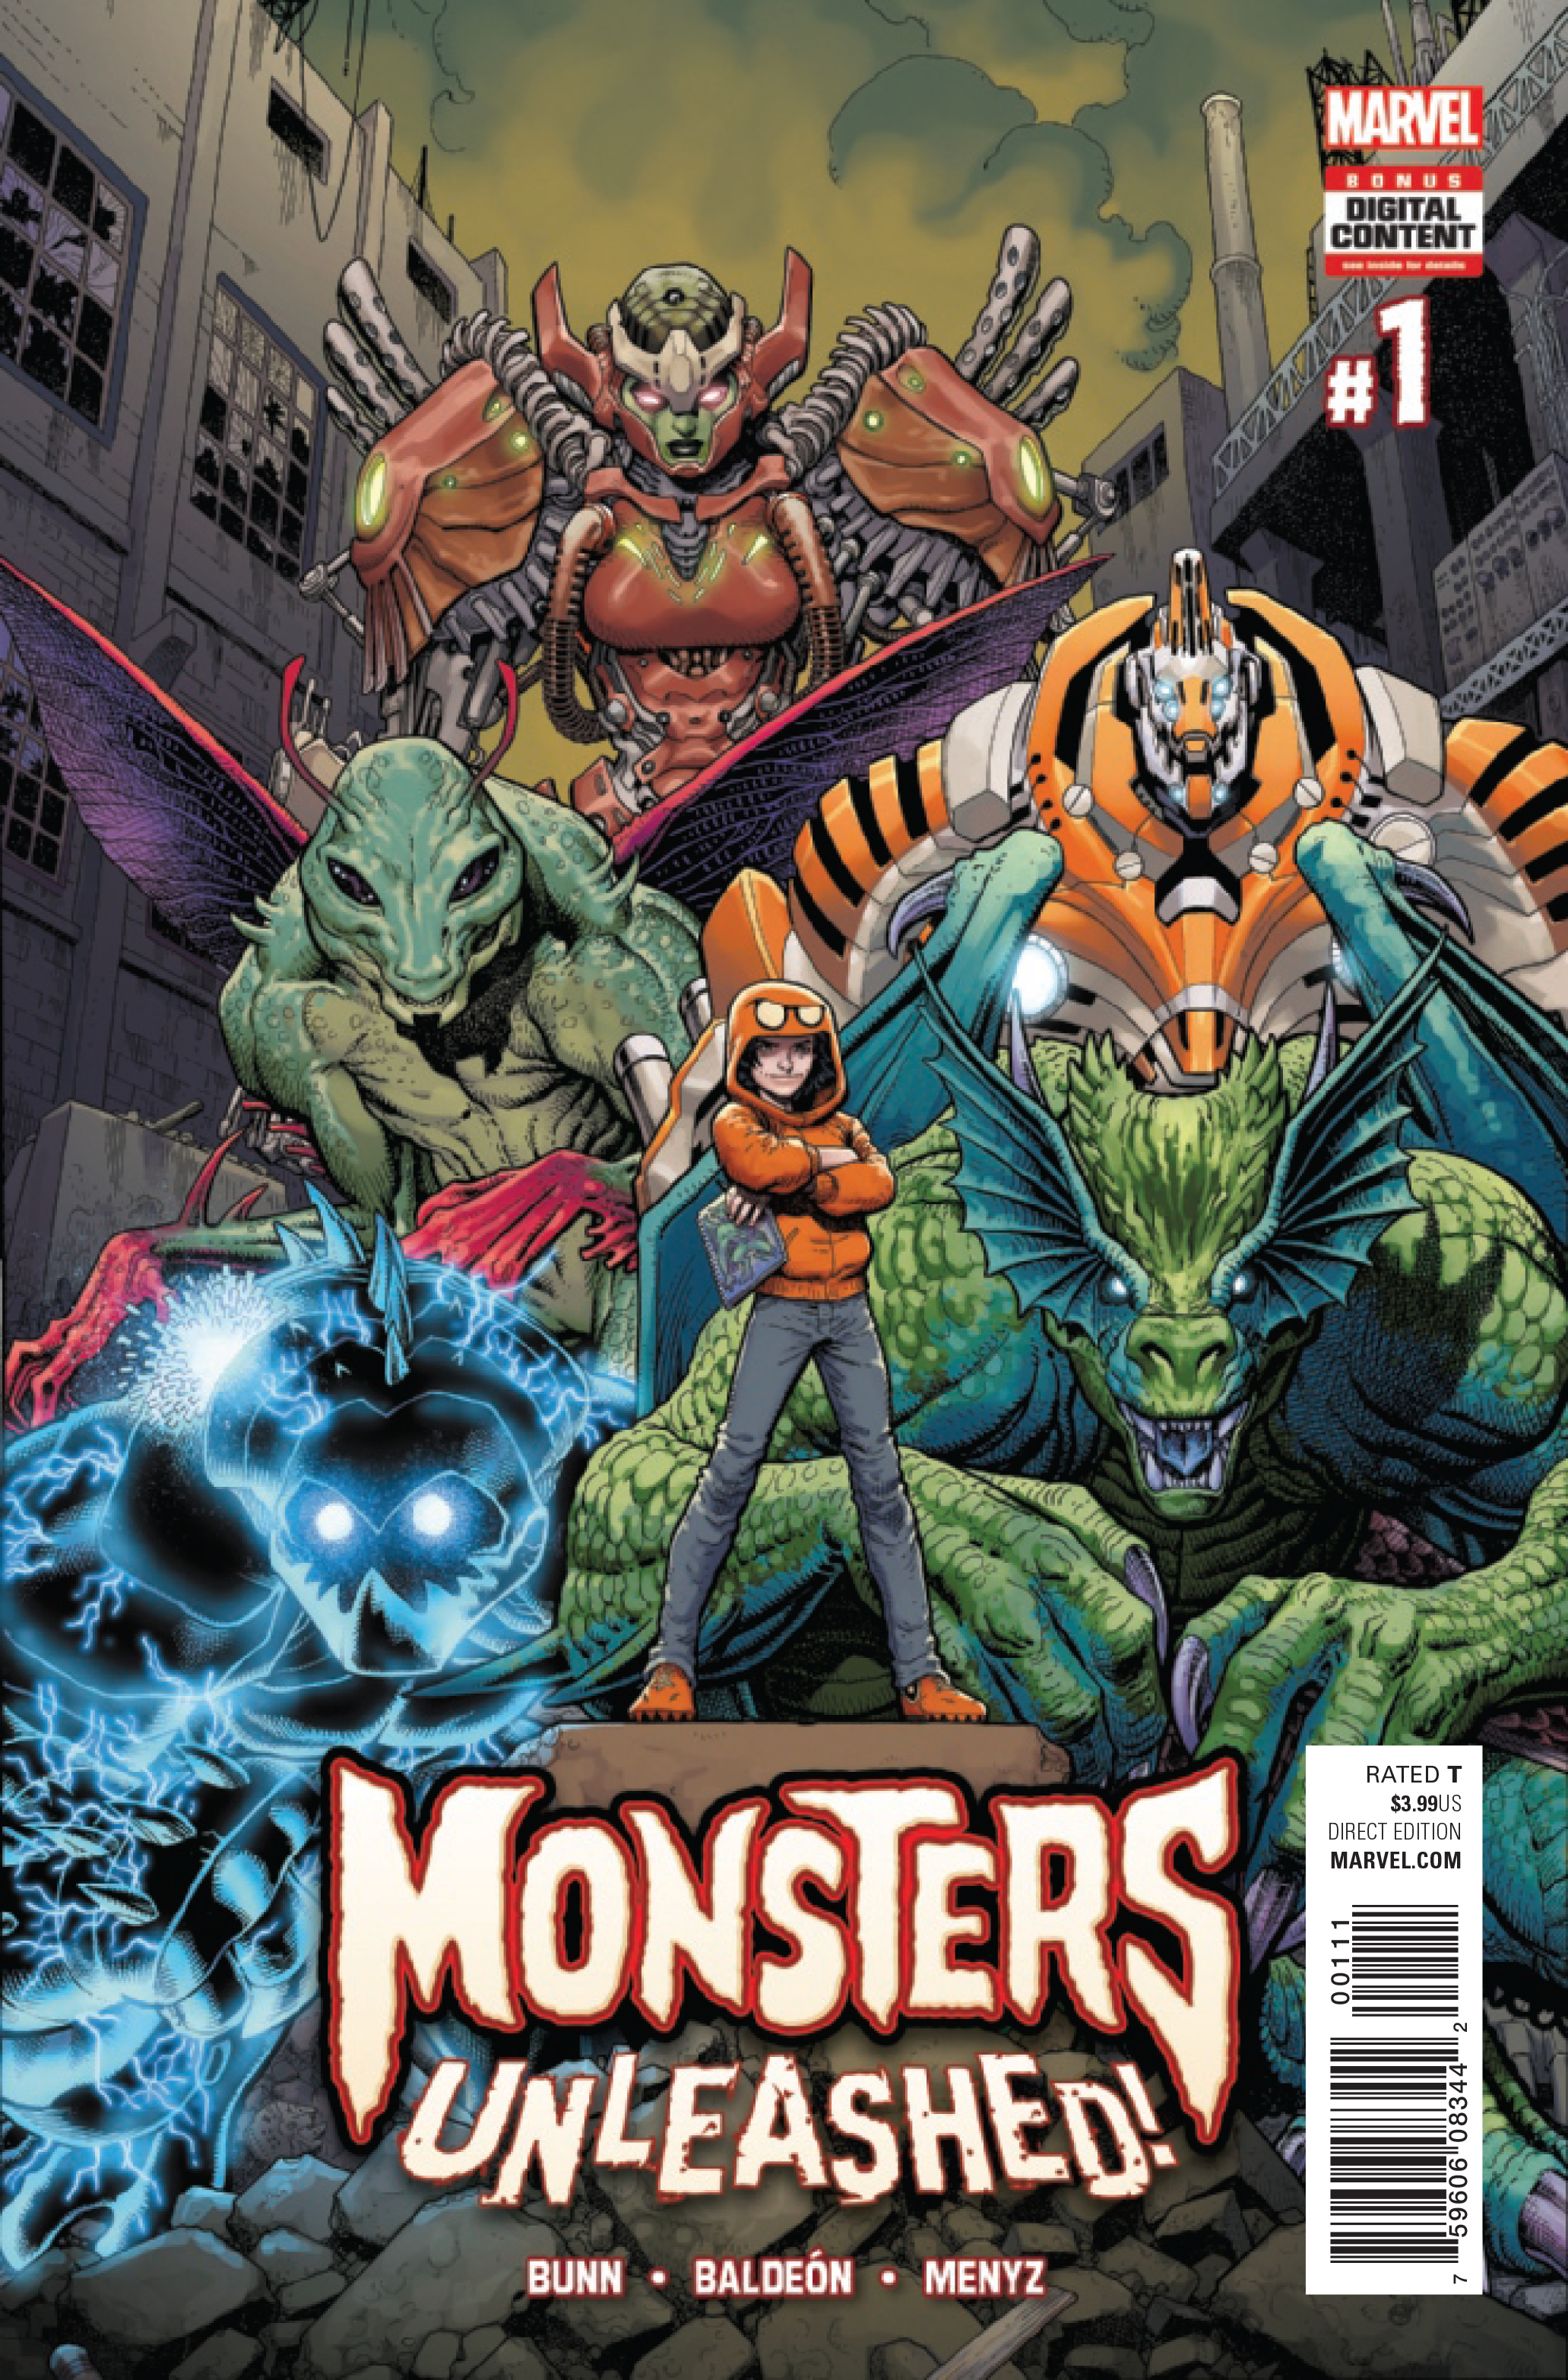 MONSTERS UNLEASHED #1